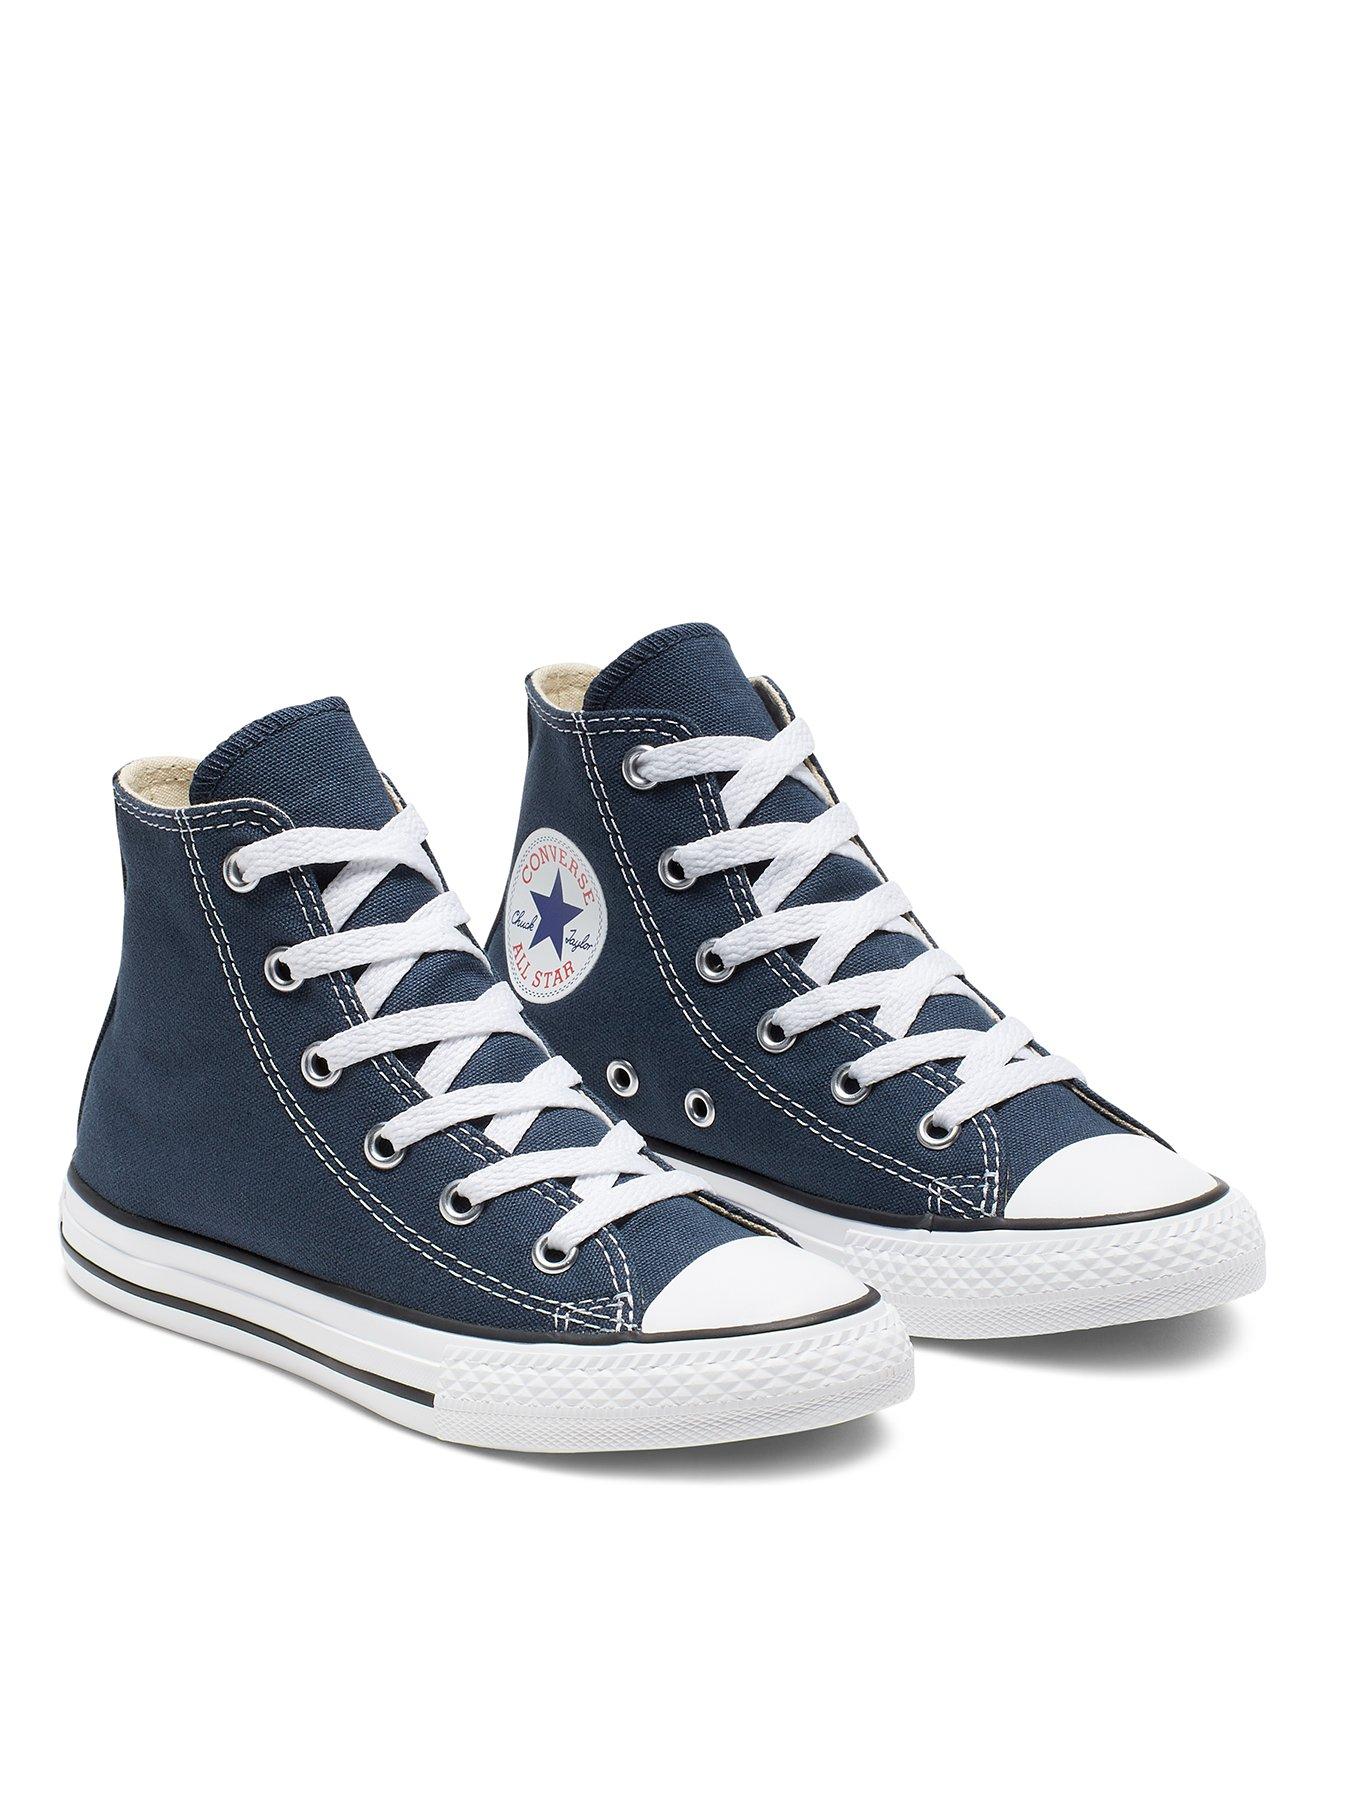 childrens converse boots